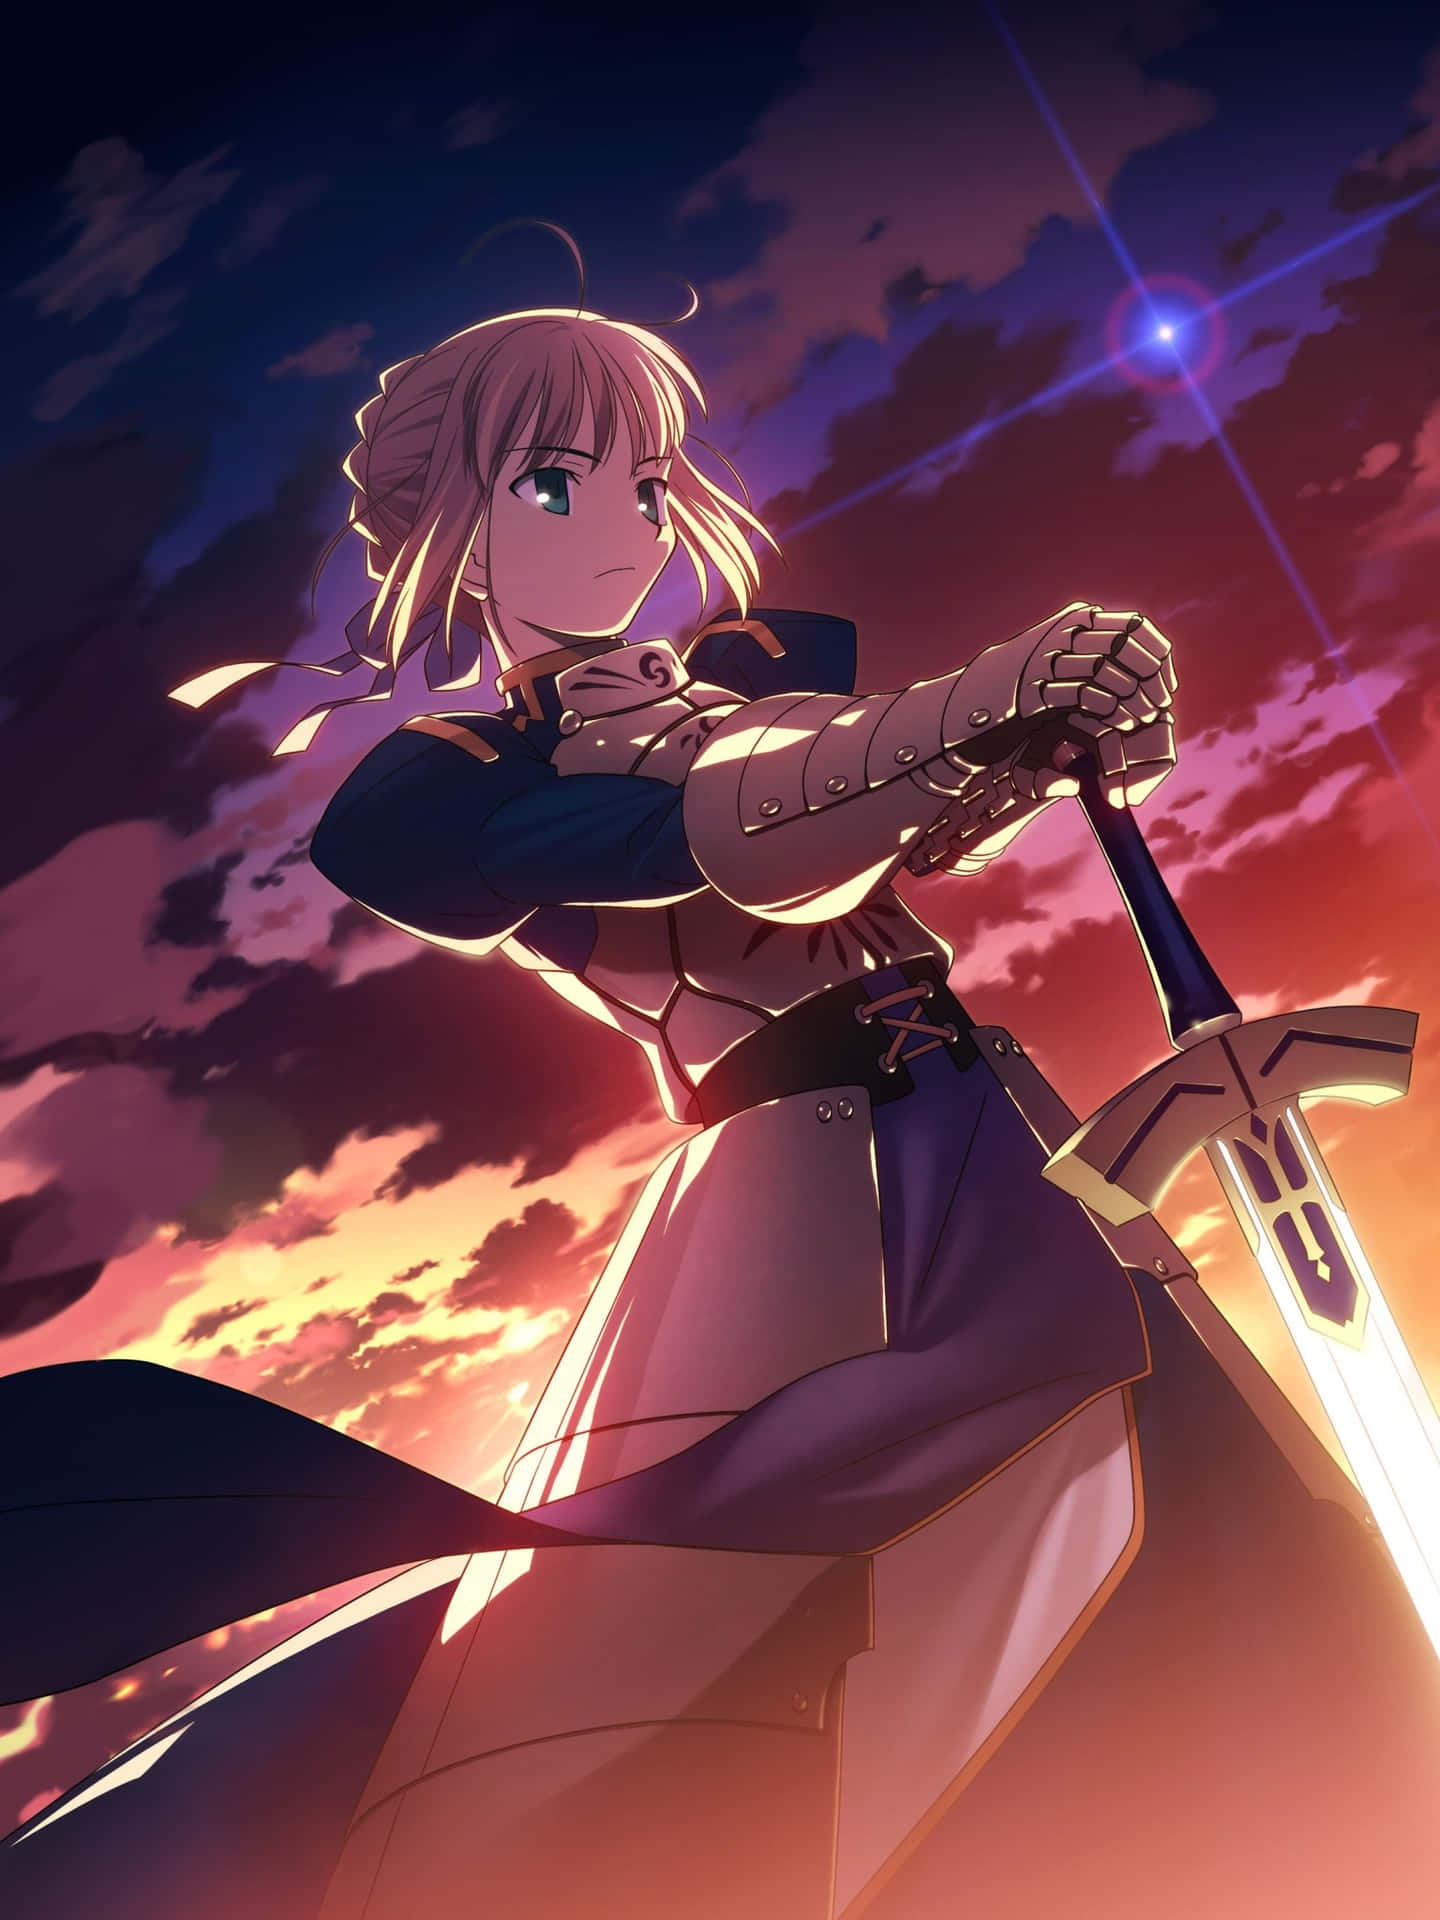 Free Saber Fate Stay Night Wallpaper Downloads, [100+] Saber Fate Stay  Night Wallpapers for FREE 